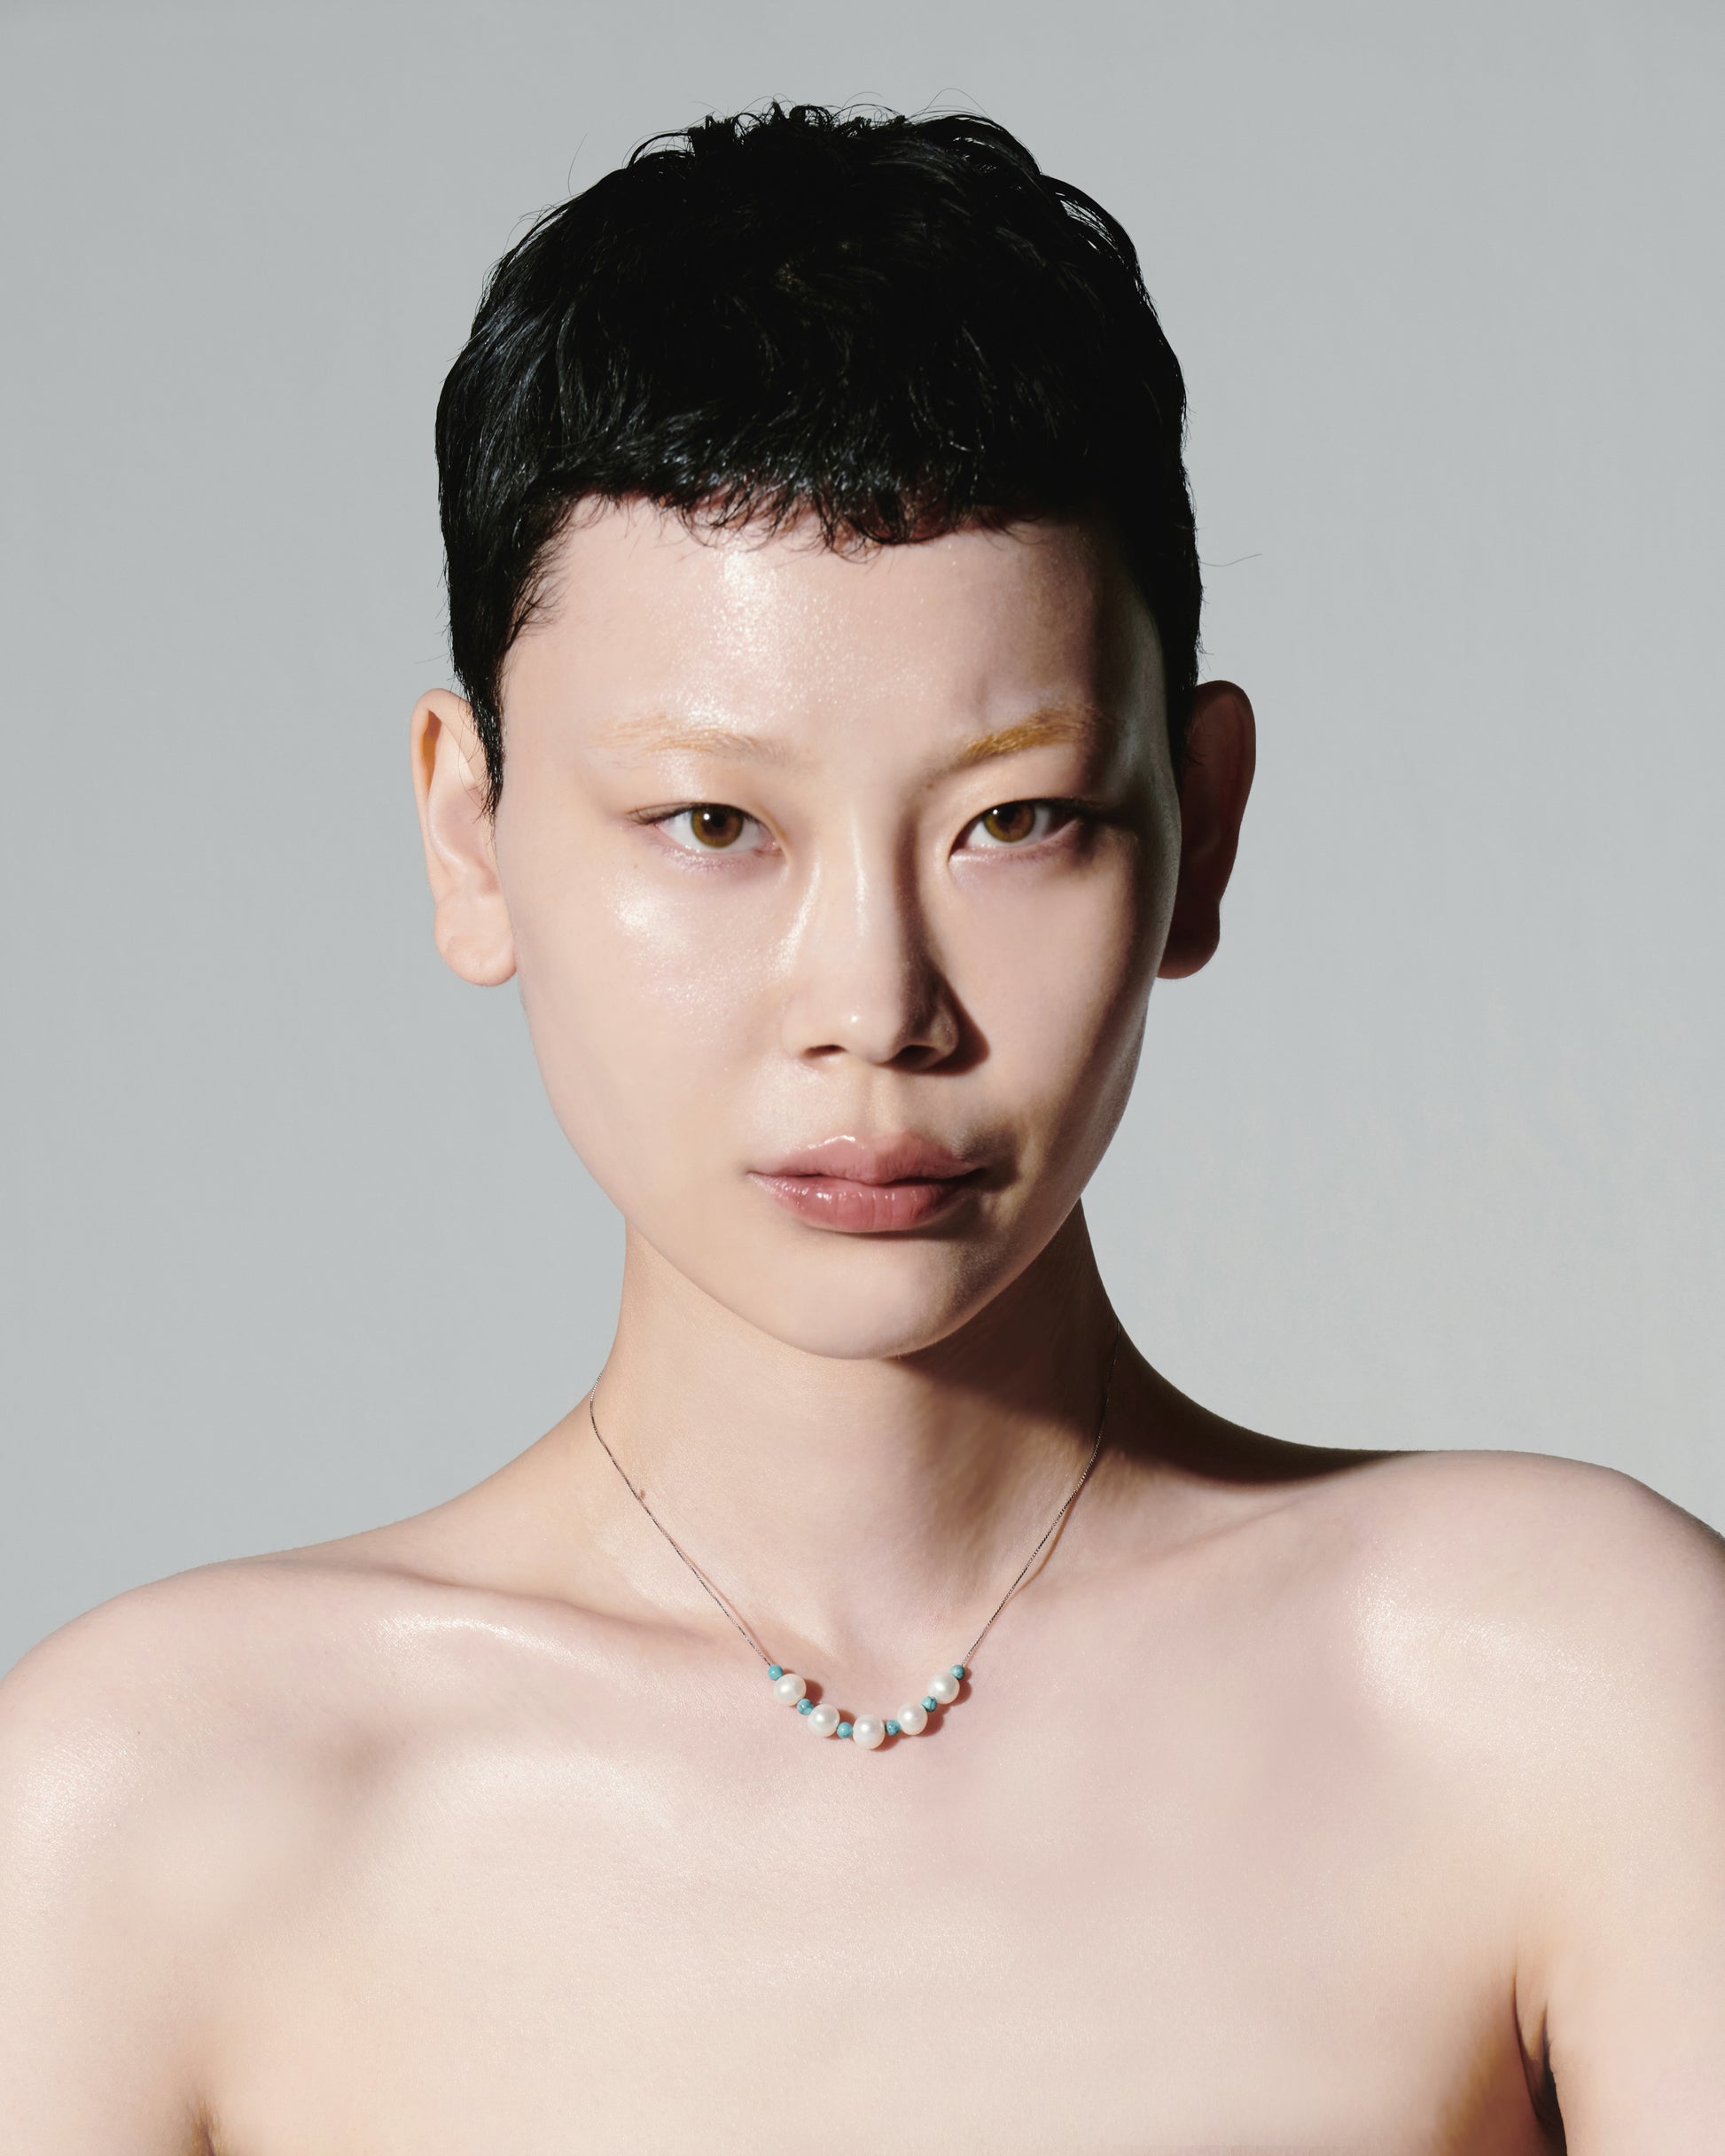 925 Sterling Silver and Turquoise Beads with Freshwater Pearls Necklace by Juxtaposition Studio Seoul Korea